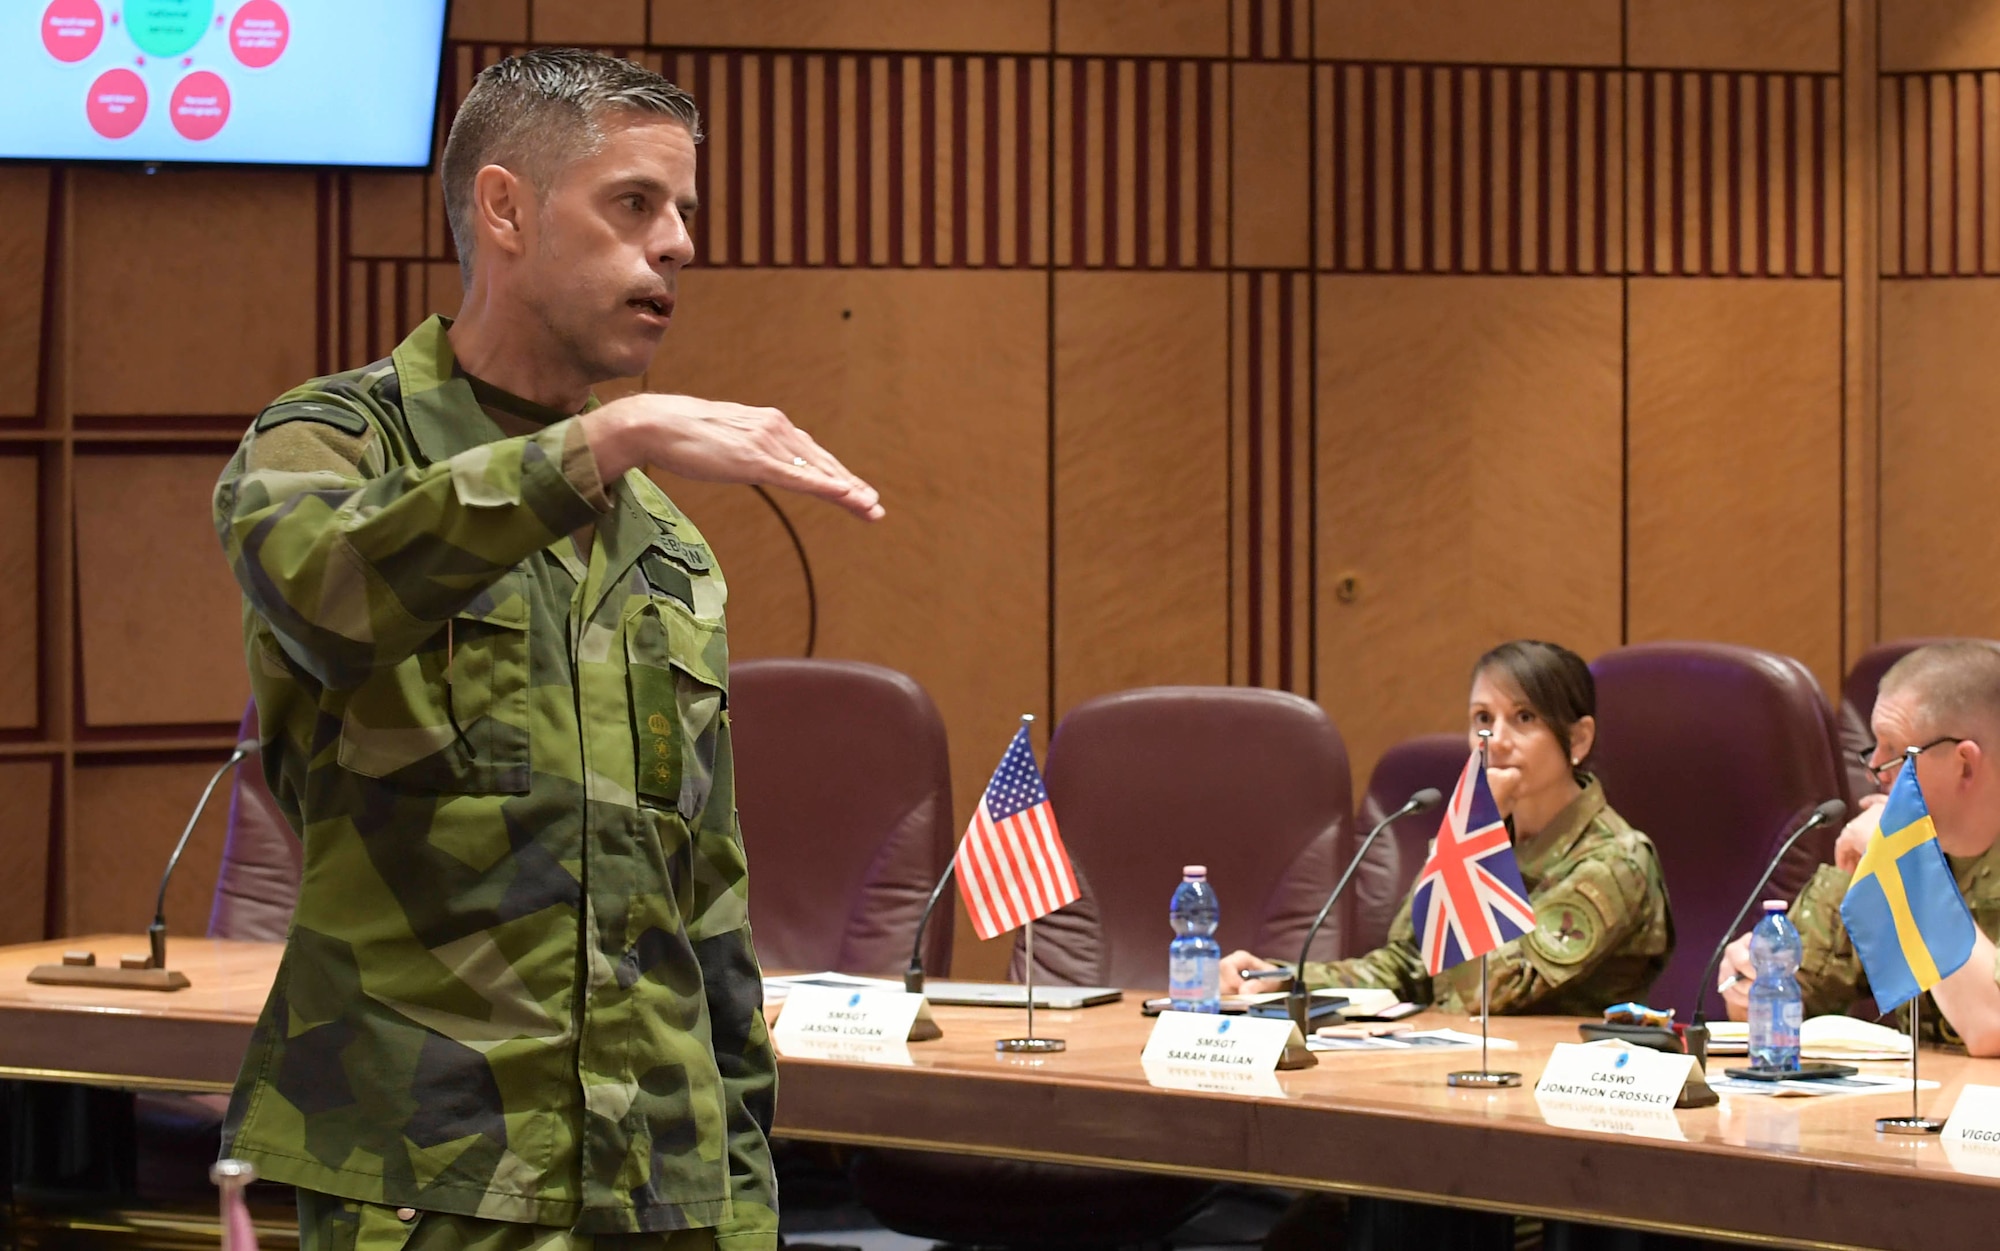 Senior enlisted leaders from across Europe attend the first European Air Forces Senior Enlisted Conference at Ramstein Air Base, Germany, May 21, 2019. Participants from 19 countries, including the United States, discussed multiple topics to help enhance personal growth, increase interoperability, and build partnership capacity. (U.S. Navy photo by Mass Communication Specialist 2nd Class Deanna C. Gonzales)